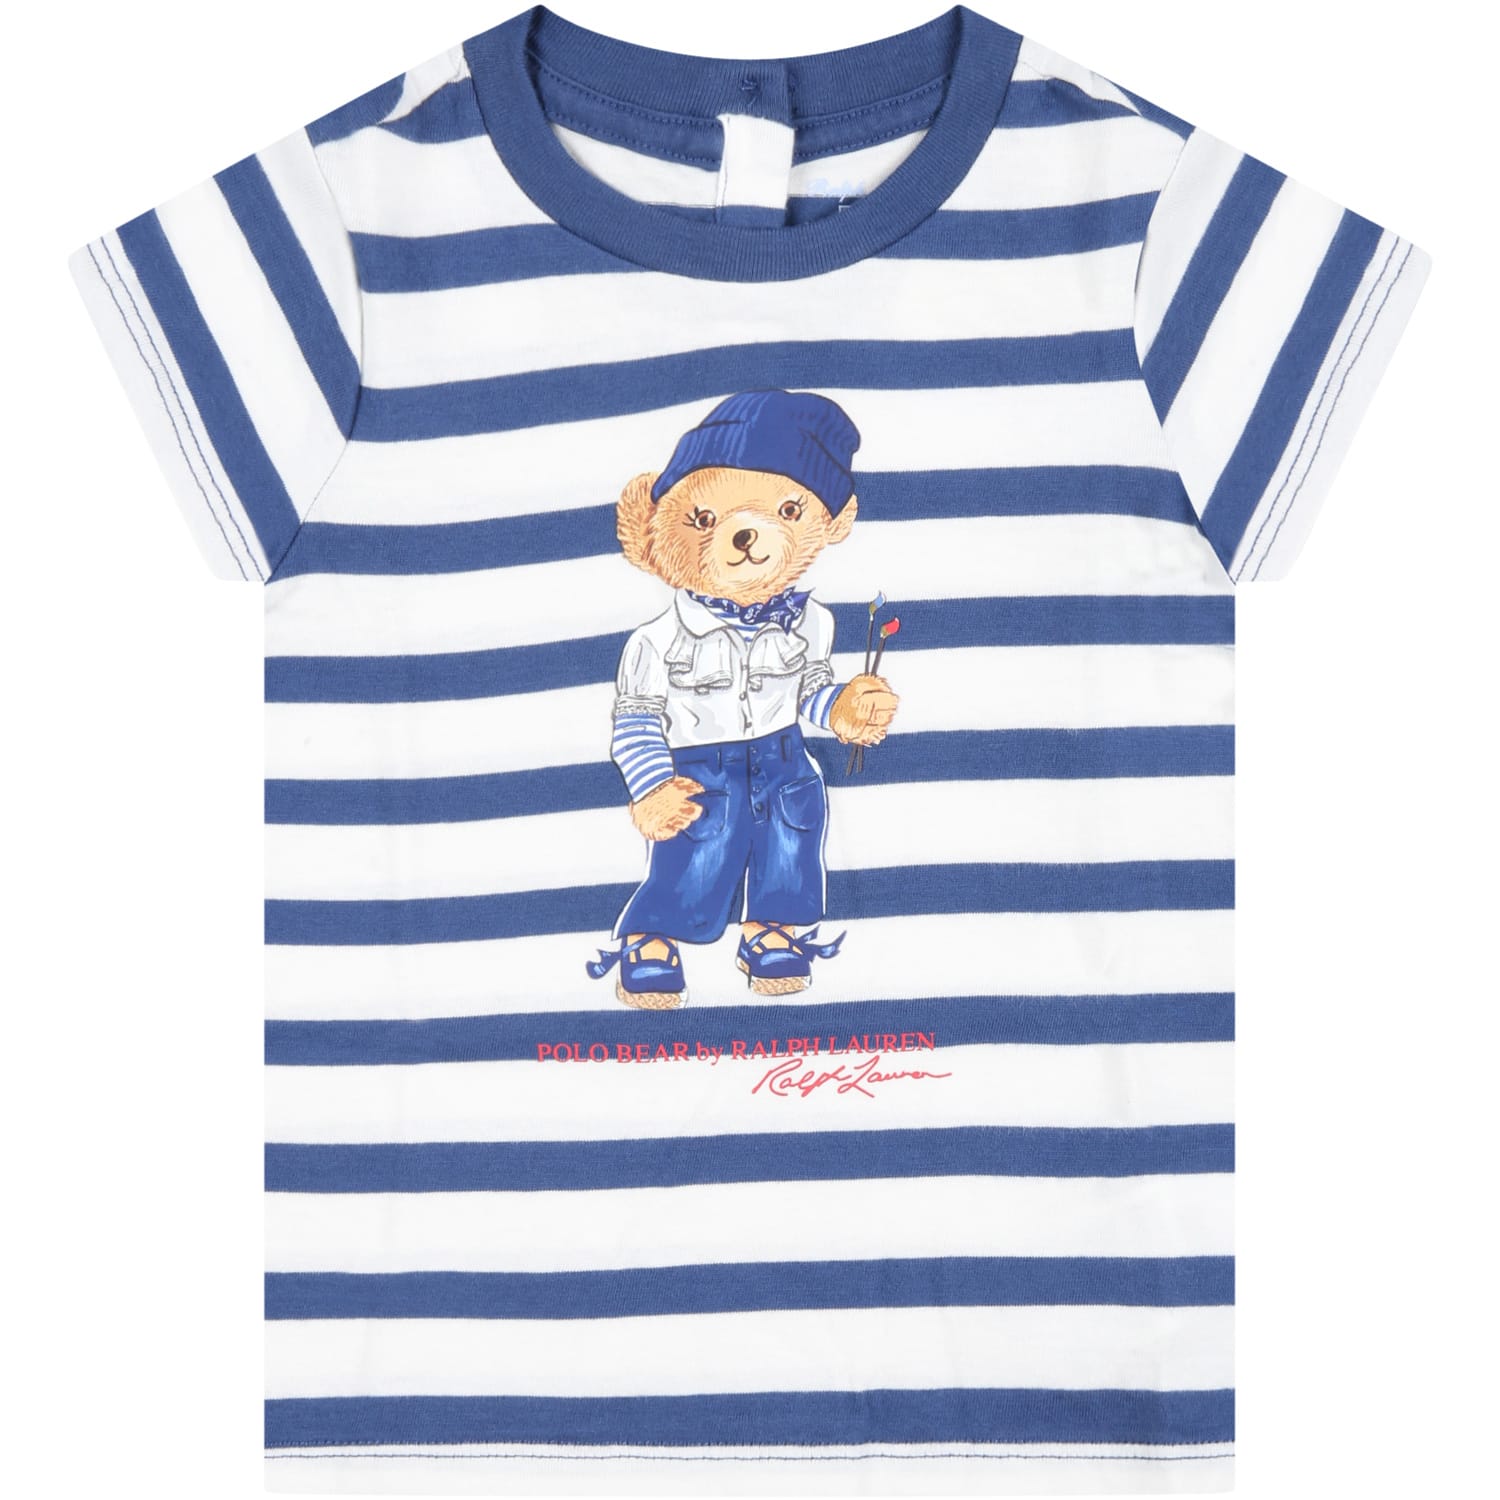 RALPH LAUREN MULTICOLO T-SHIRT FOR BABY GIRL WITH POLO BEAR AND RED LOGO